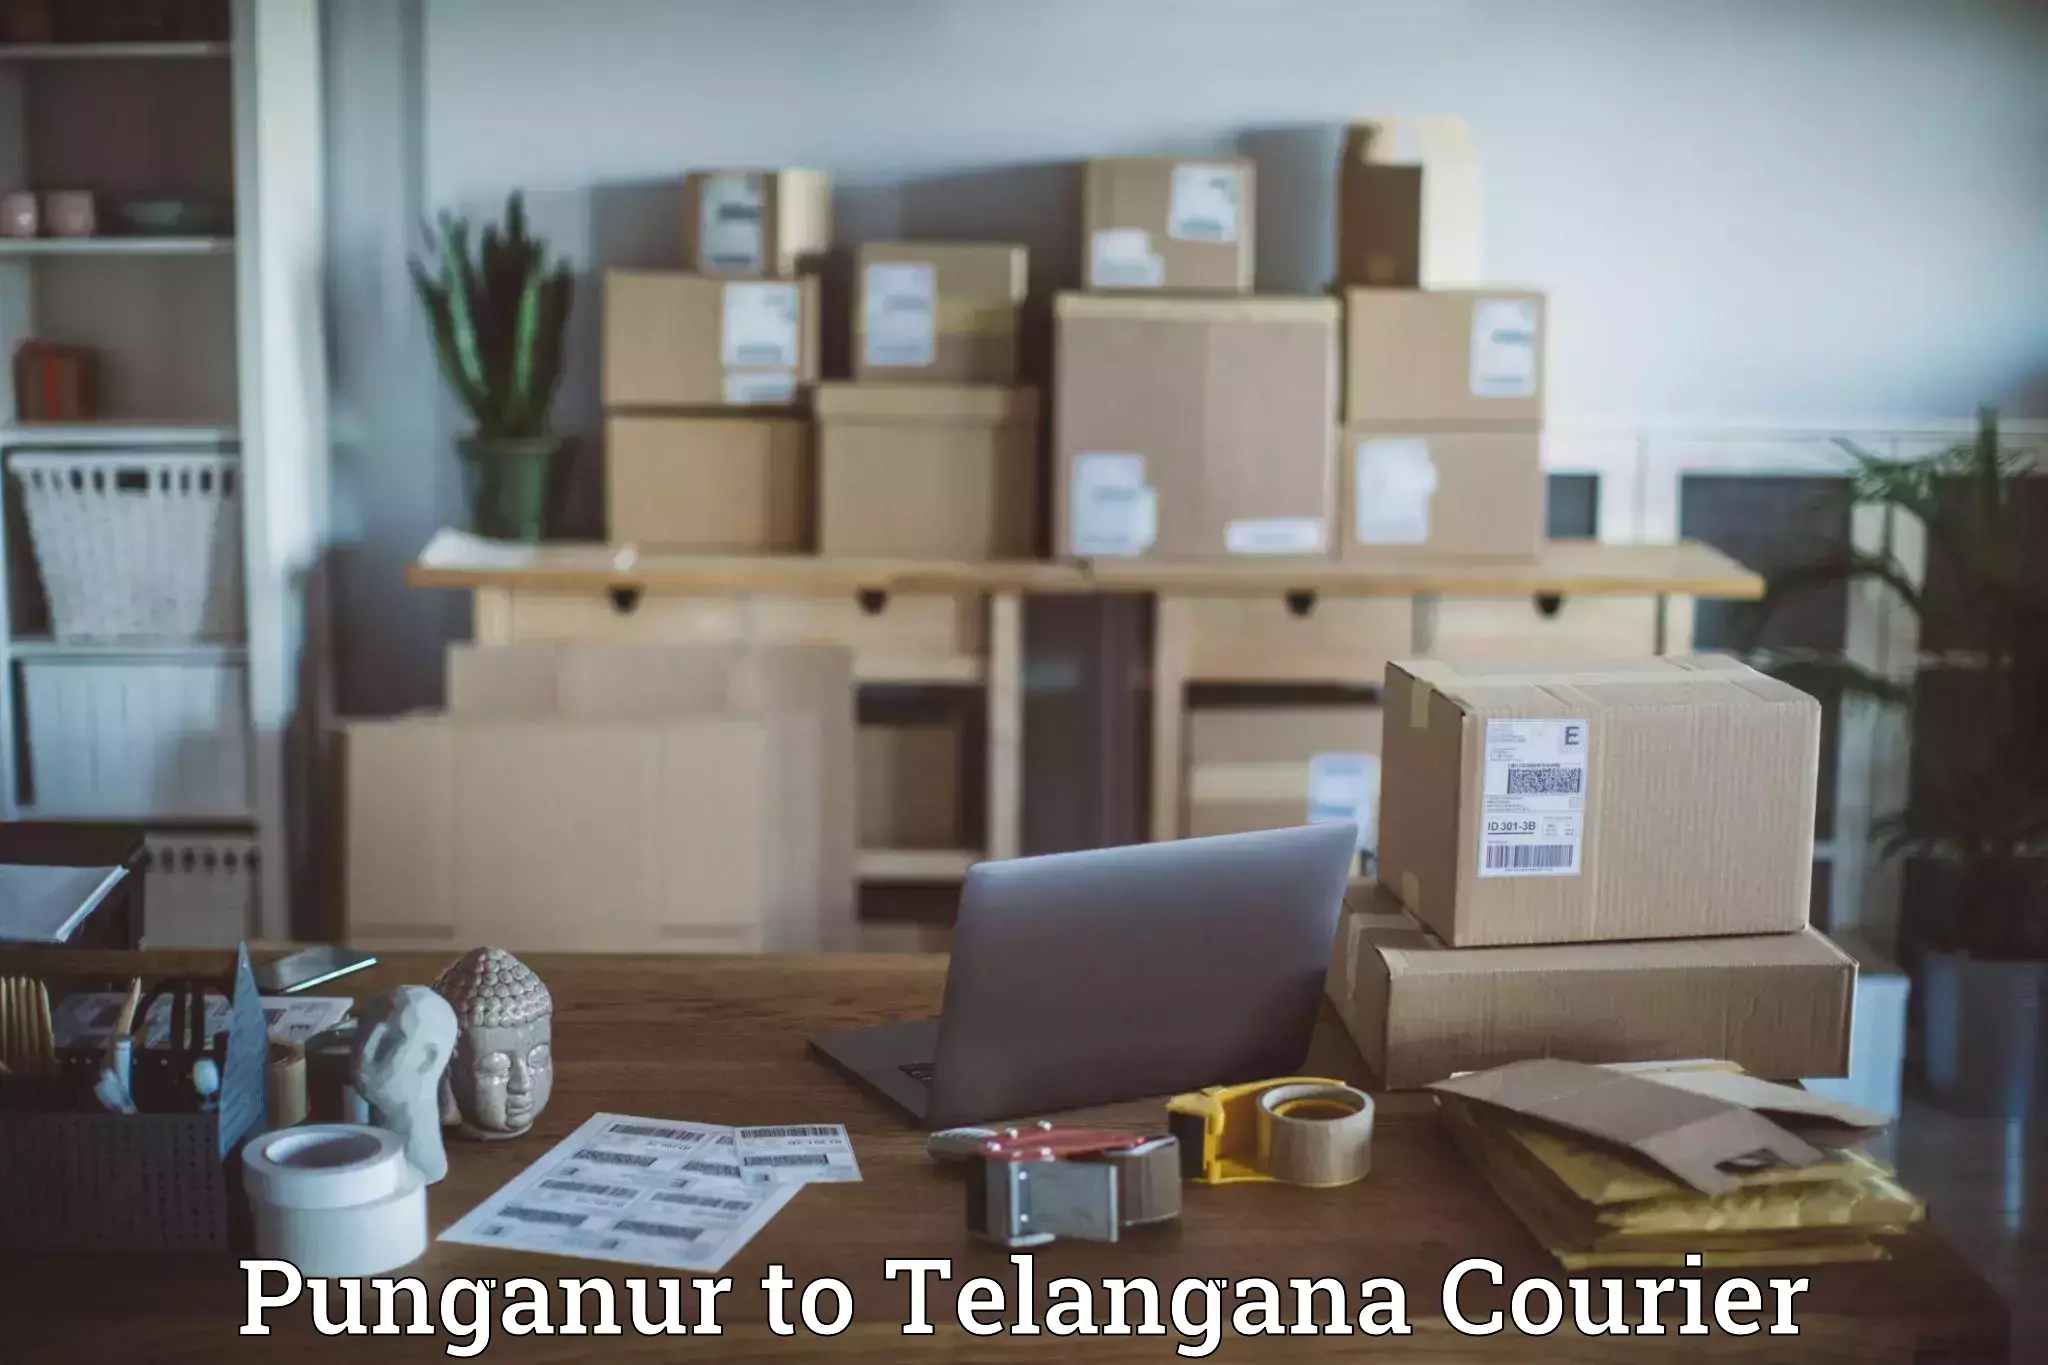 Nationwide courier service Punganur to Vemulawada